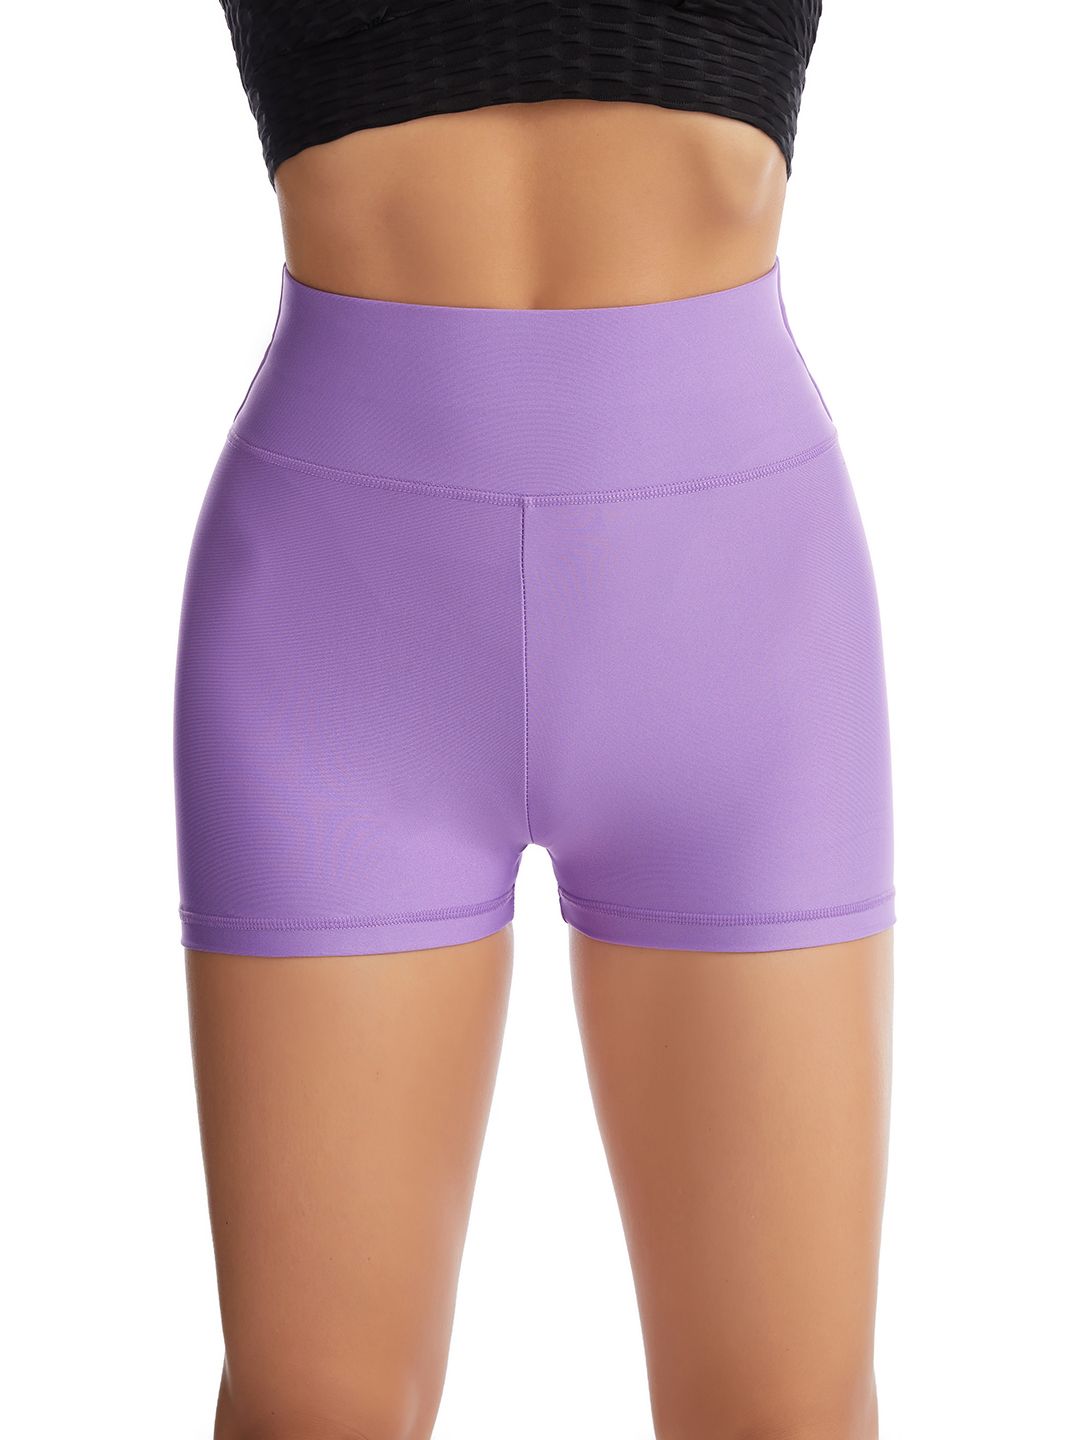 URBANIC Women Lavender Solid Slim Fit High-Rise Training or Gym Sports Shorts Price in India